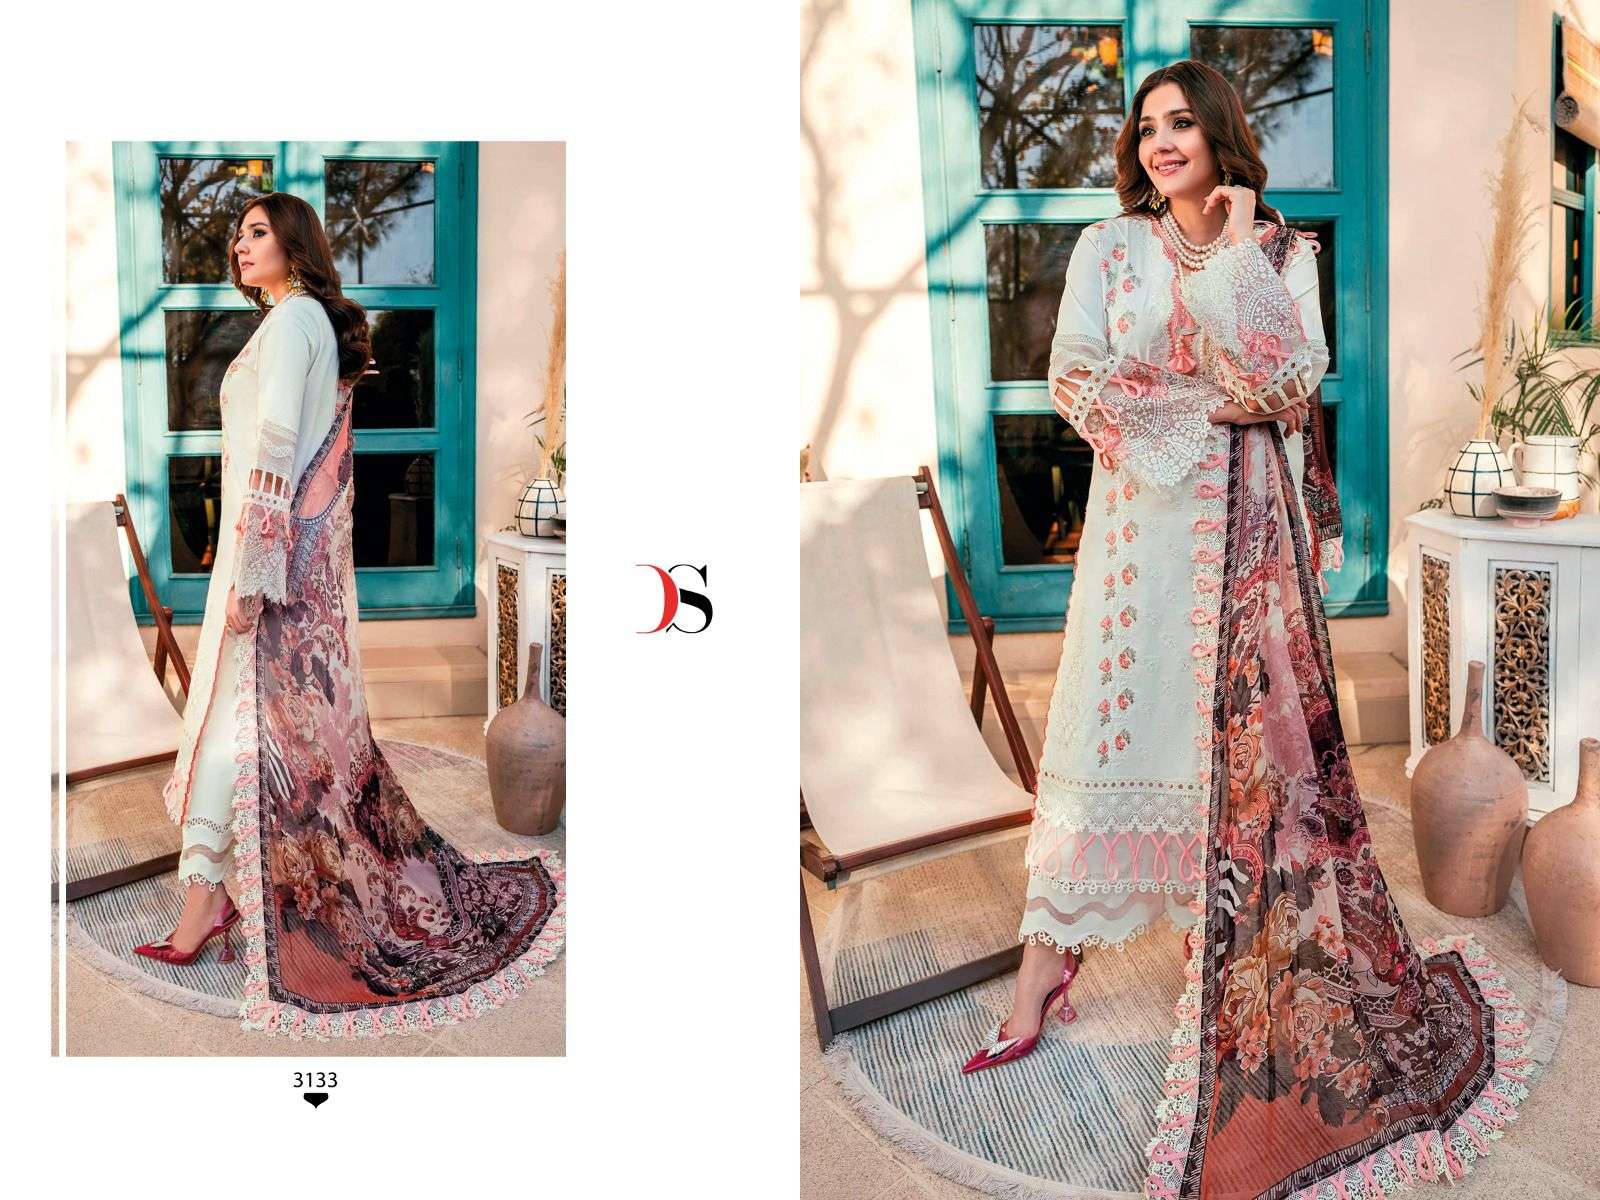 DEEPSY SUITS FIRDOUS OMBRE EMBROIDERED VOL 2 SUPER NX 